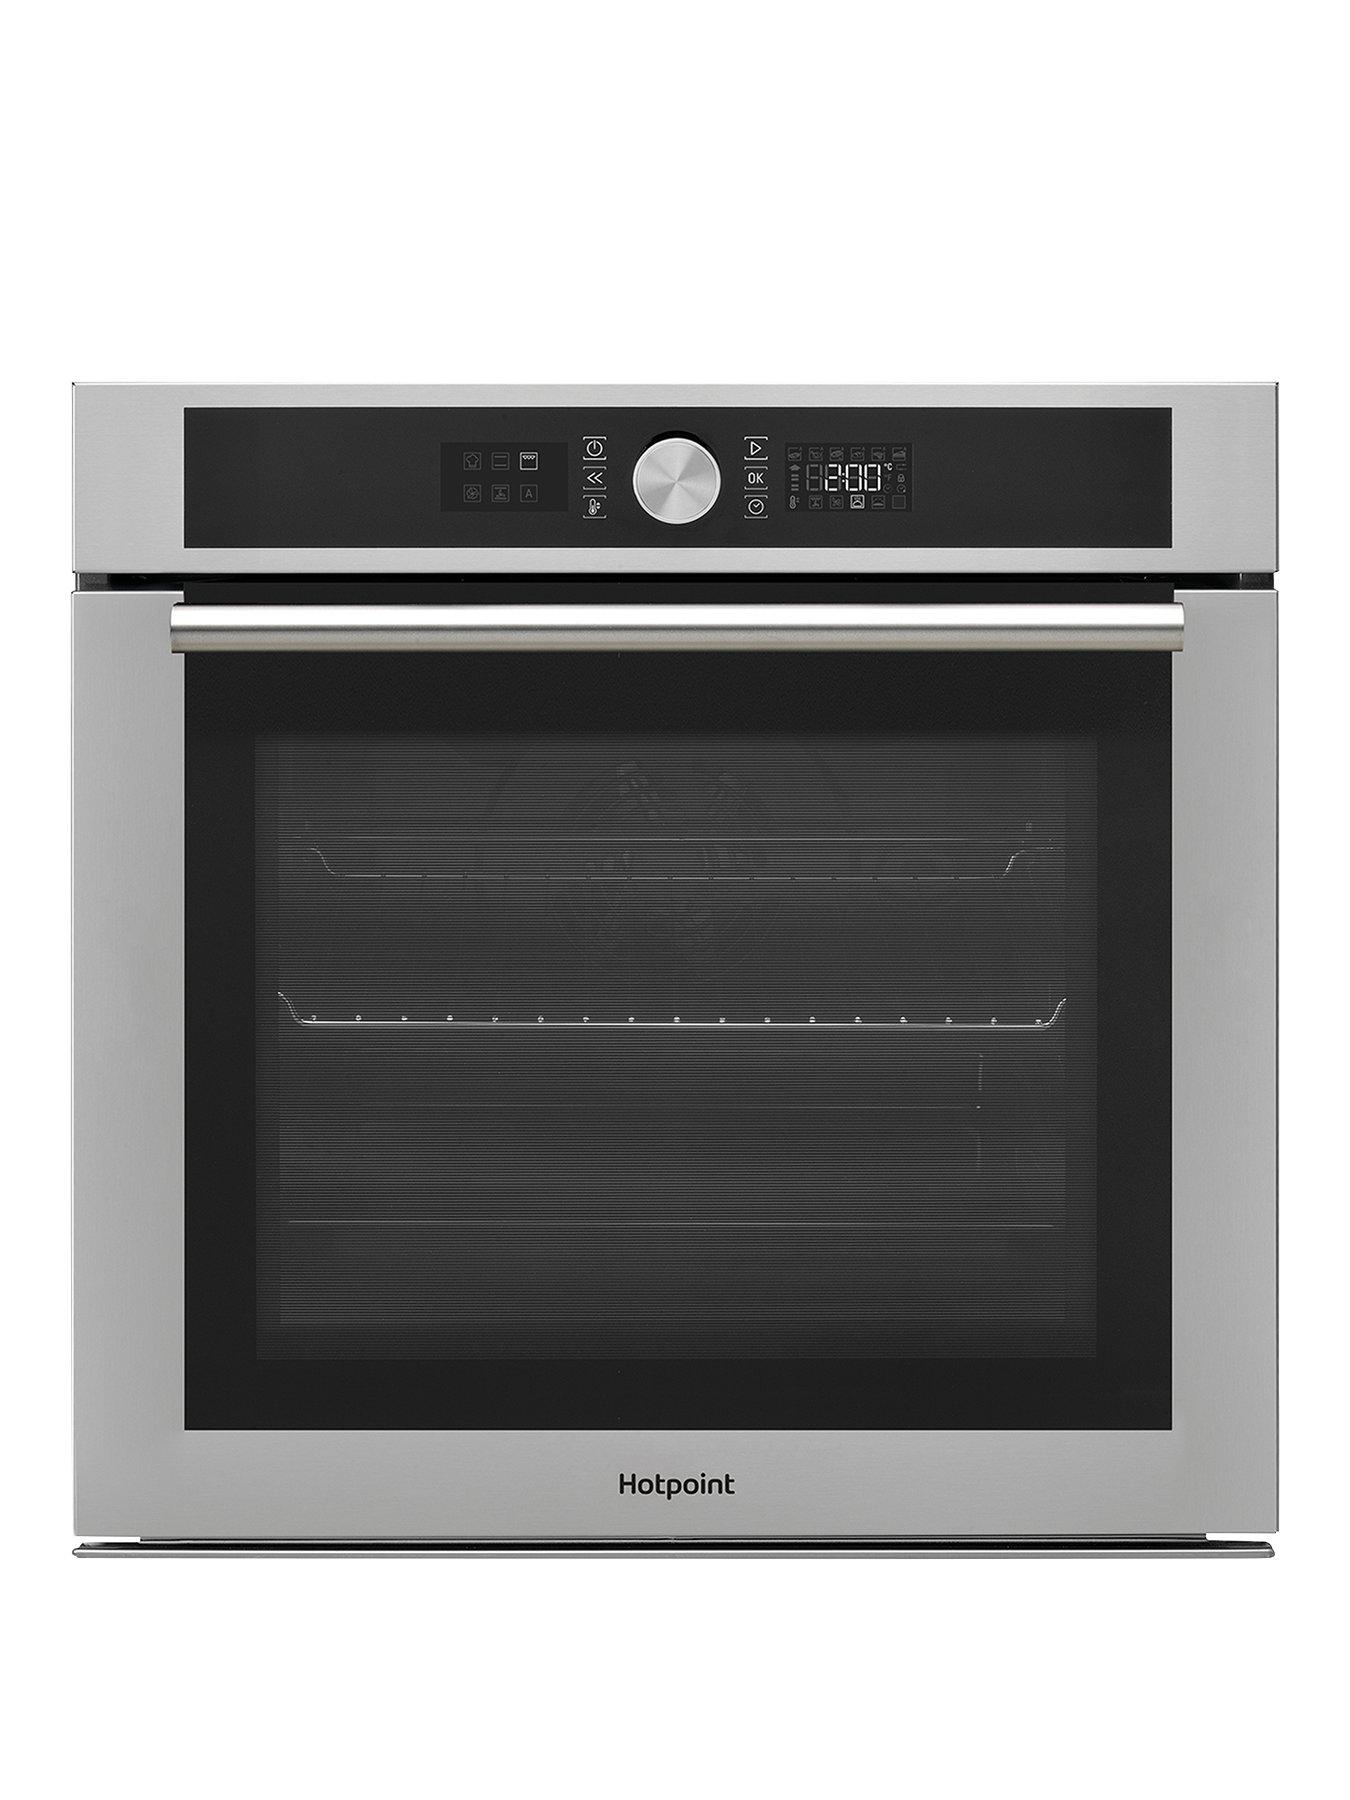 Hotpoint Class 4 Multiflow Si4854Hix 60Cm Built-In Electric Single Oven - Stainless Steel - Oven Only